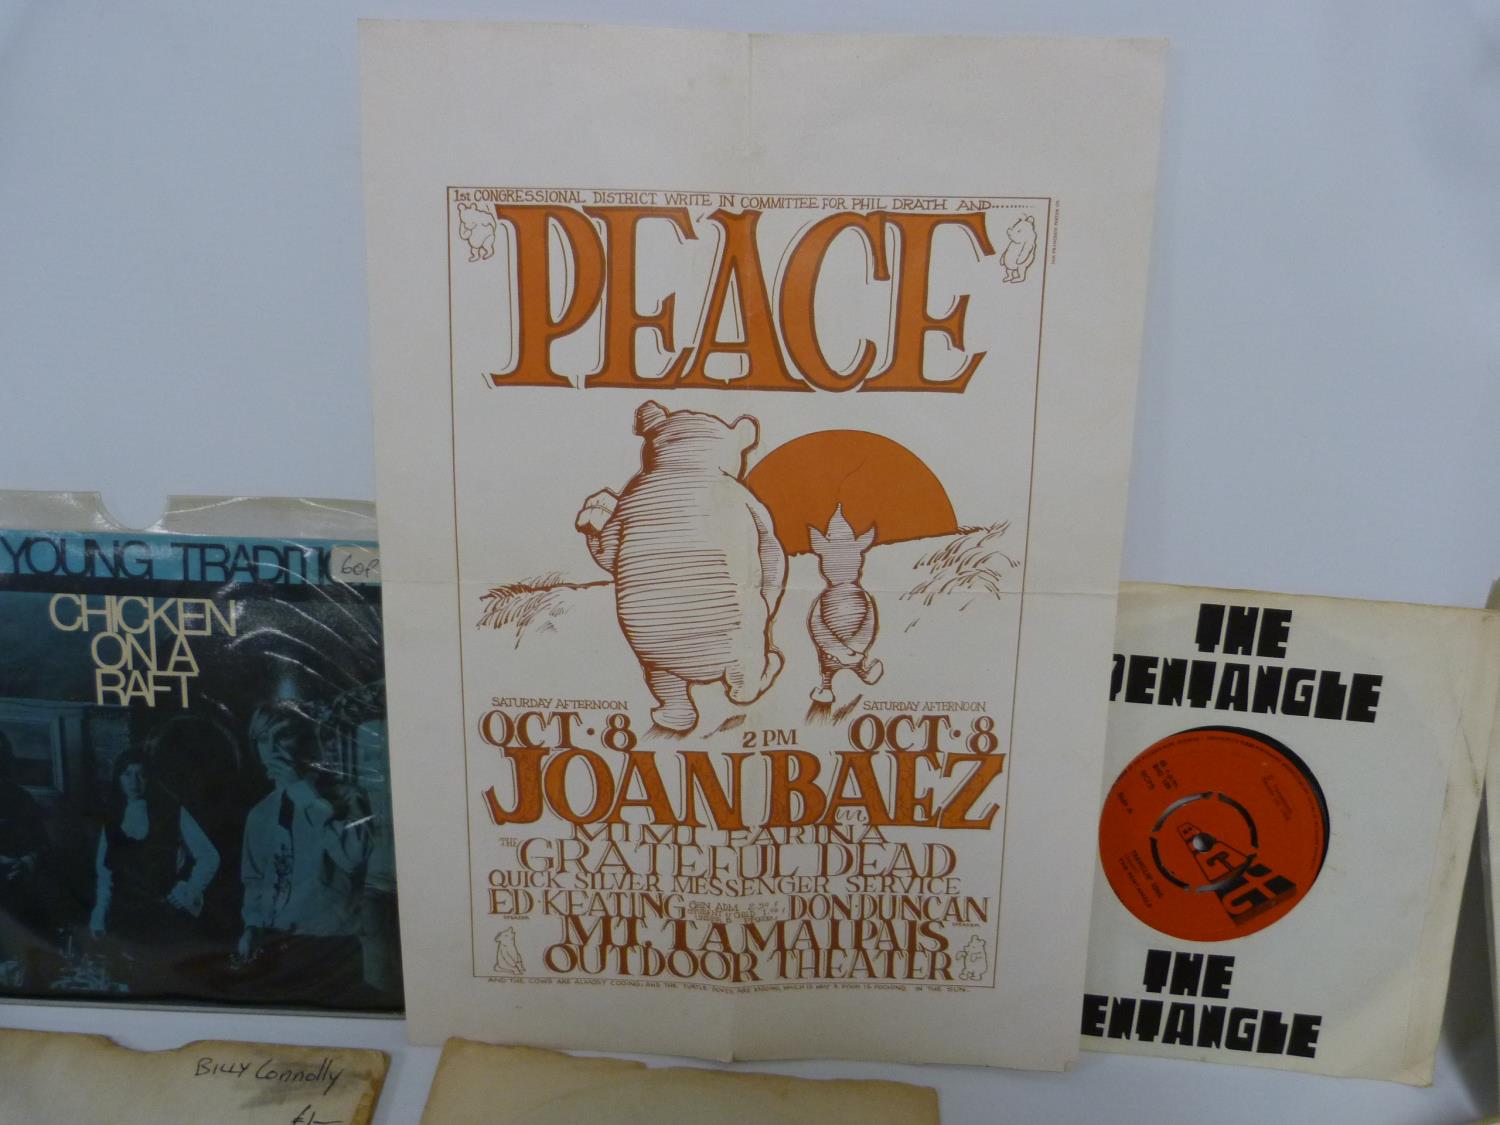 BIG T FOLK RECORDS TO INCLUDE PENTANGLE (IN PENTANGLE SLEEVE) AND PURPLE GANG WITH RARE PROMO - Image 5 of 5